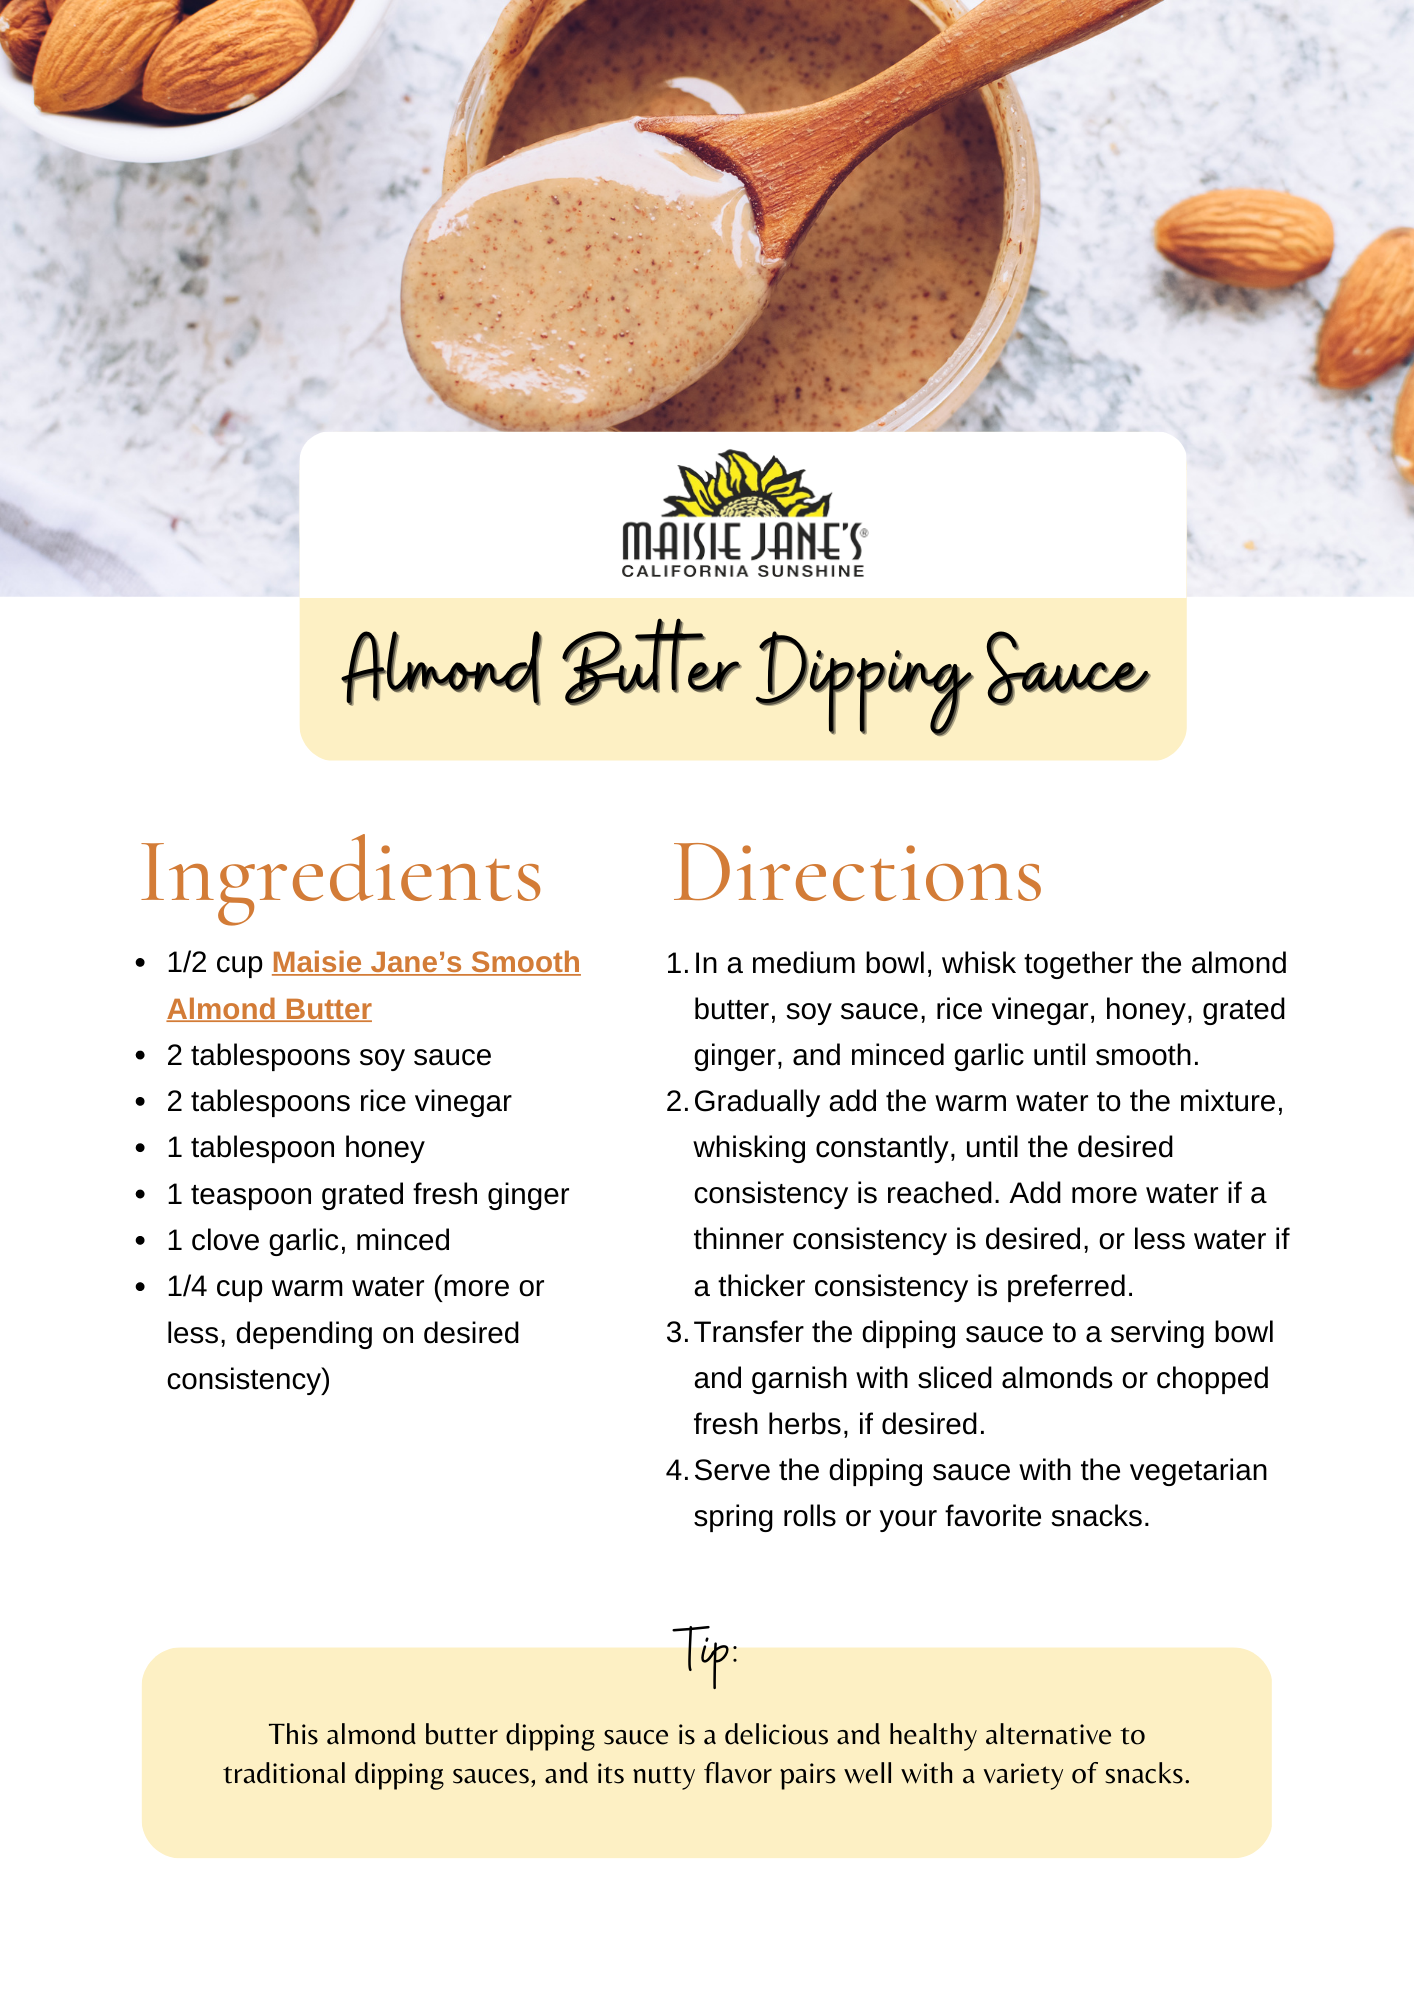 Maisie Jane's Almond Butter Dipping Sauce